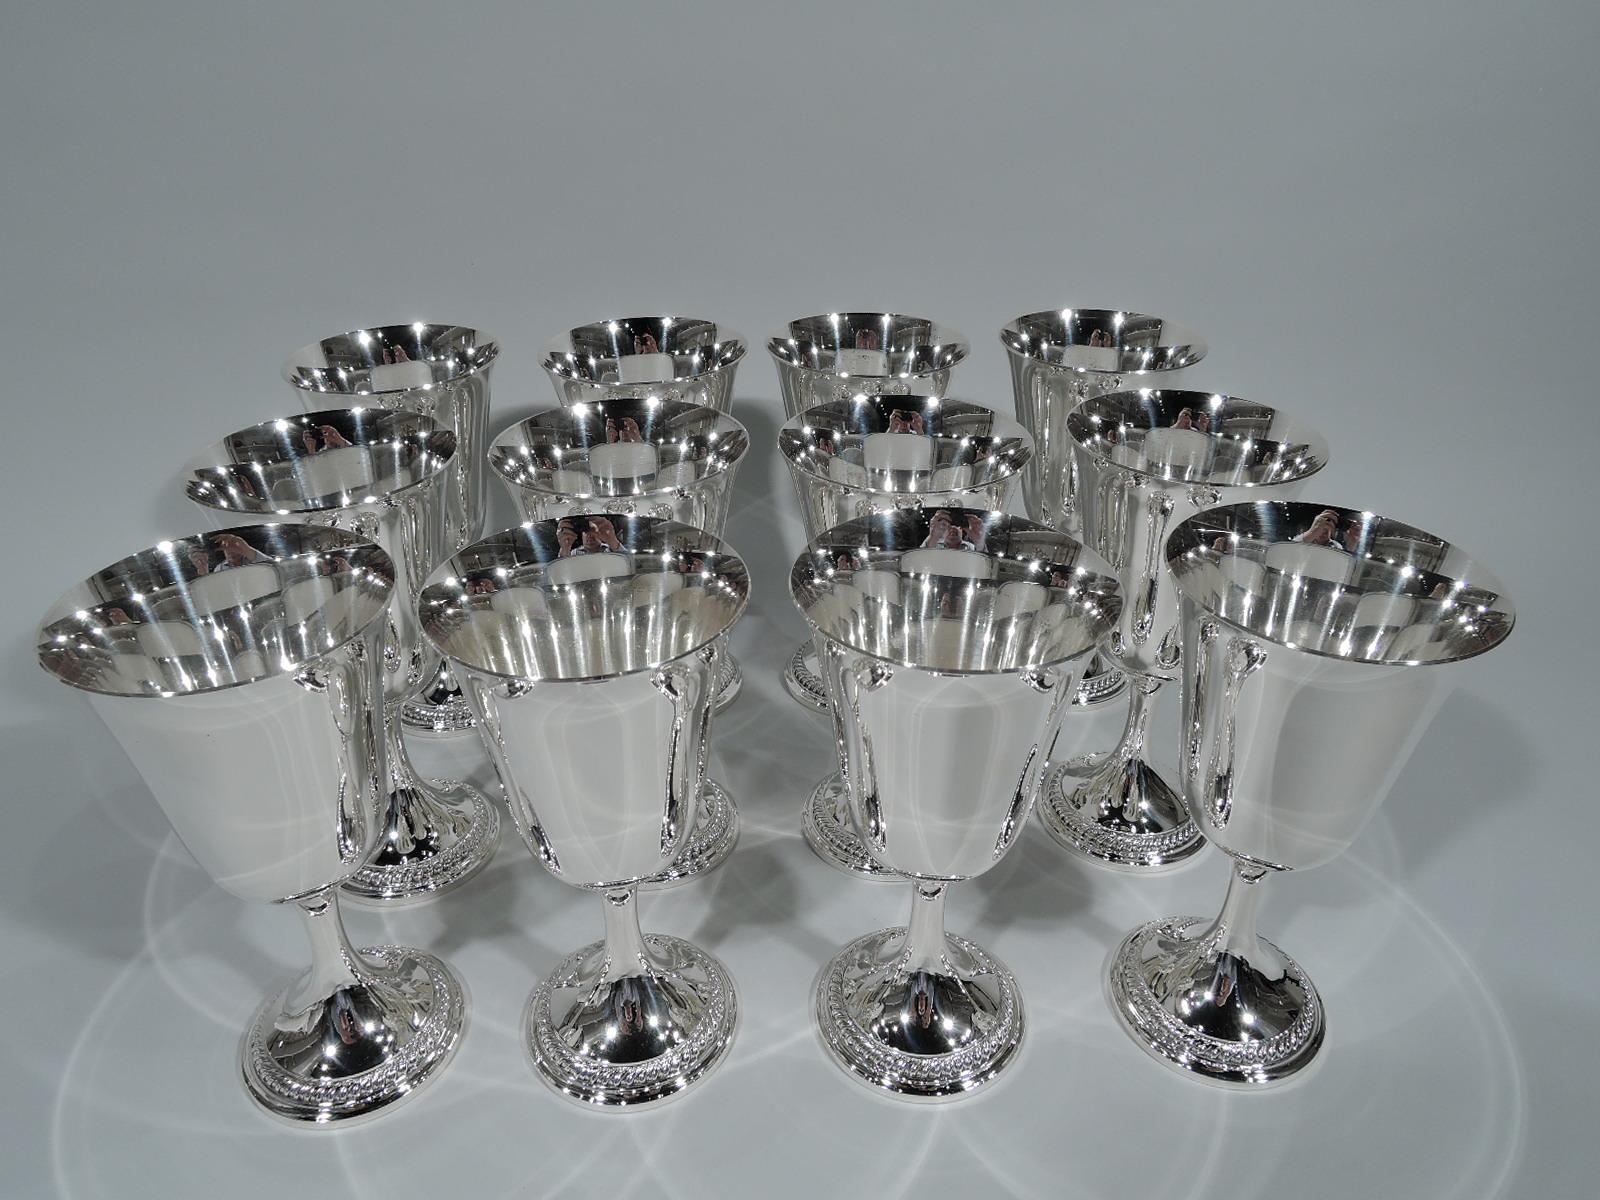 Set of 12 sterling silver goblets. Made by Gorham in Providence. Each: Tapering bowl with flared rim, cylindrical stem, and raised foot with gadrooned rim. Sleek Modern form with a Georgian touch. Hallmark includes no. 533. Total weight: 70 troy